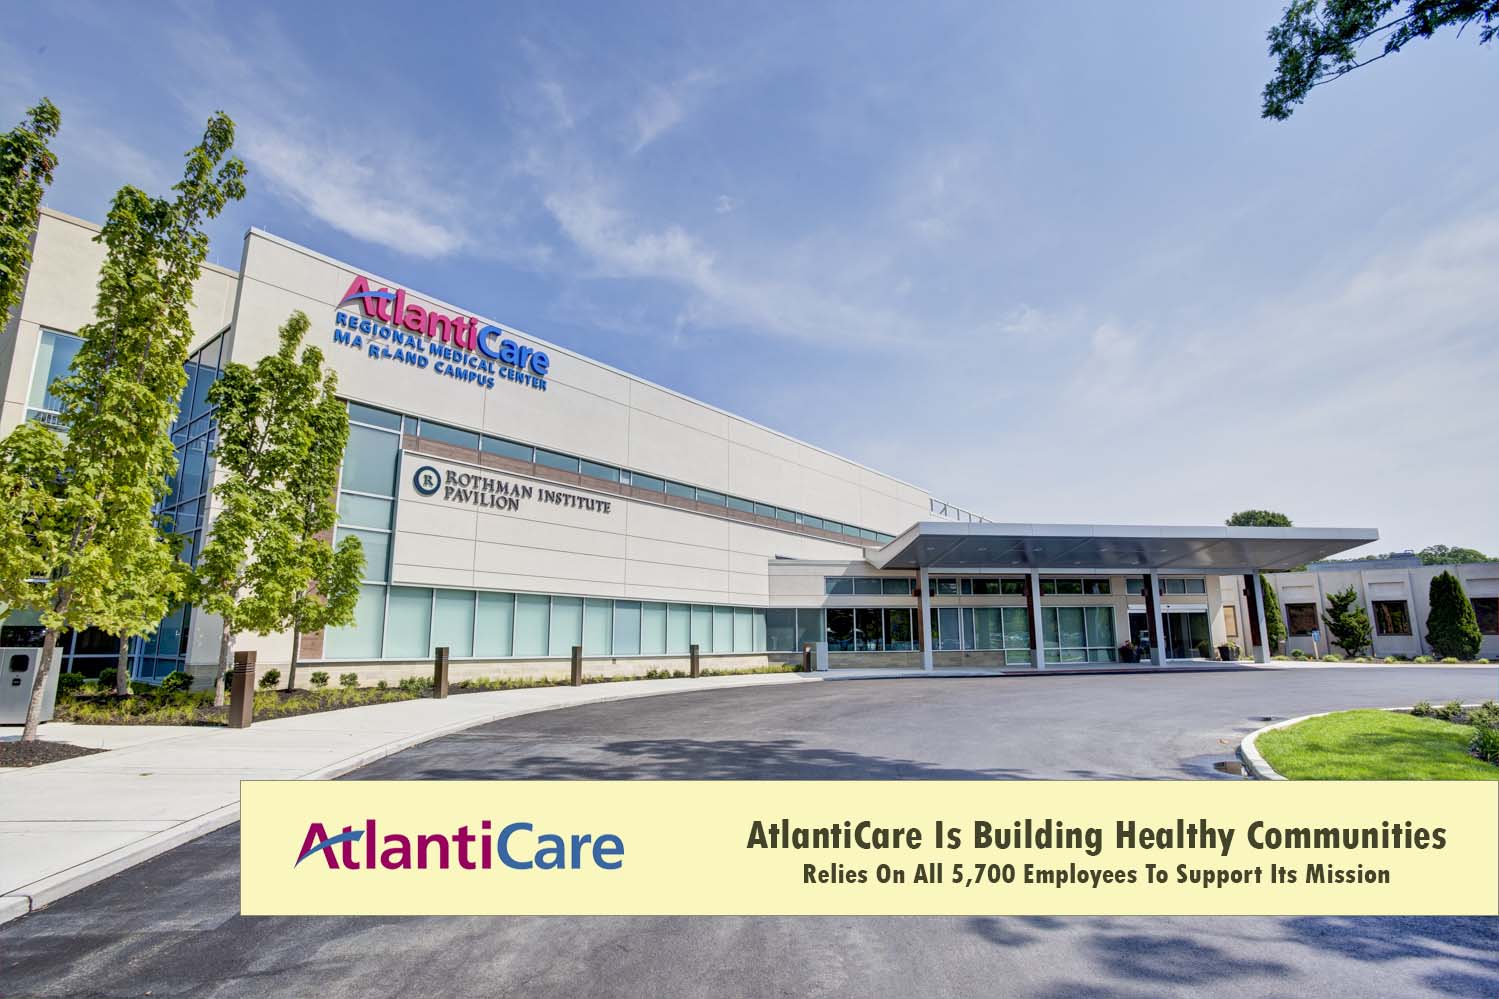 AtlantiCare Invests In All 5,700 Employees To Support Its Mission